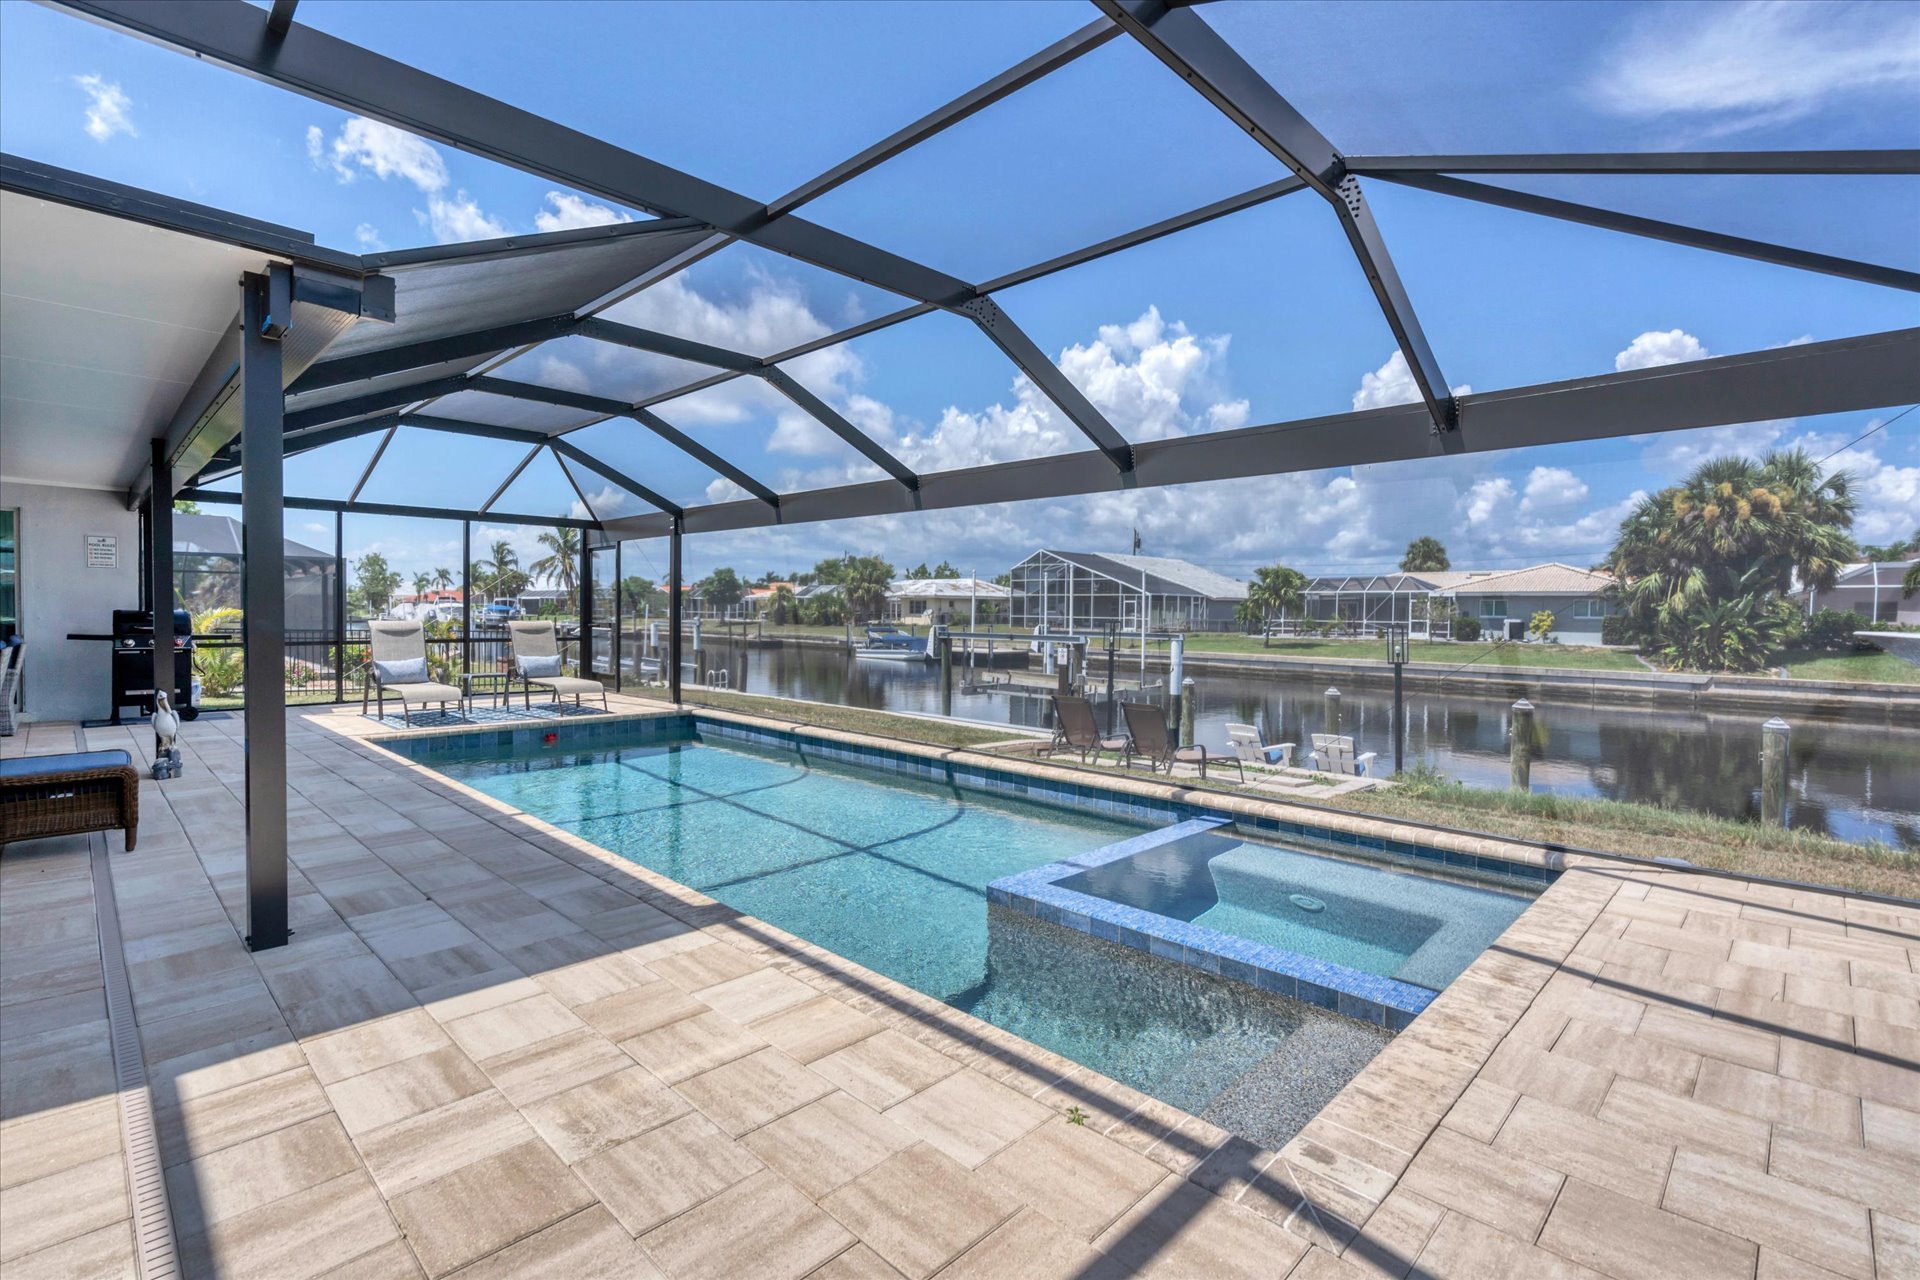 Punta Gorda Isles Pool Spa Canal Home with dock space